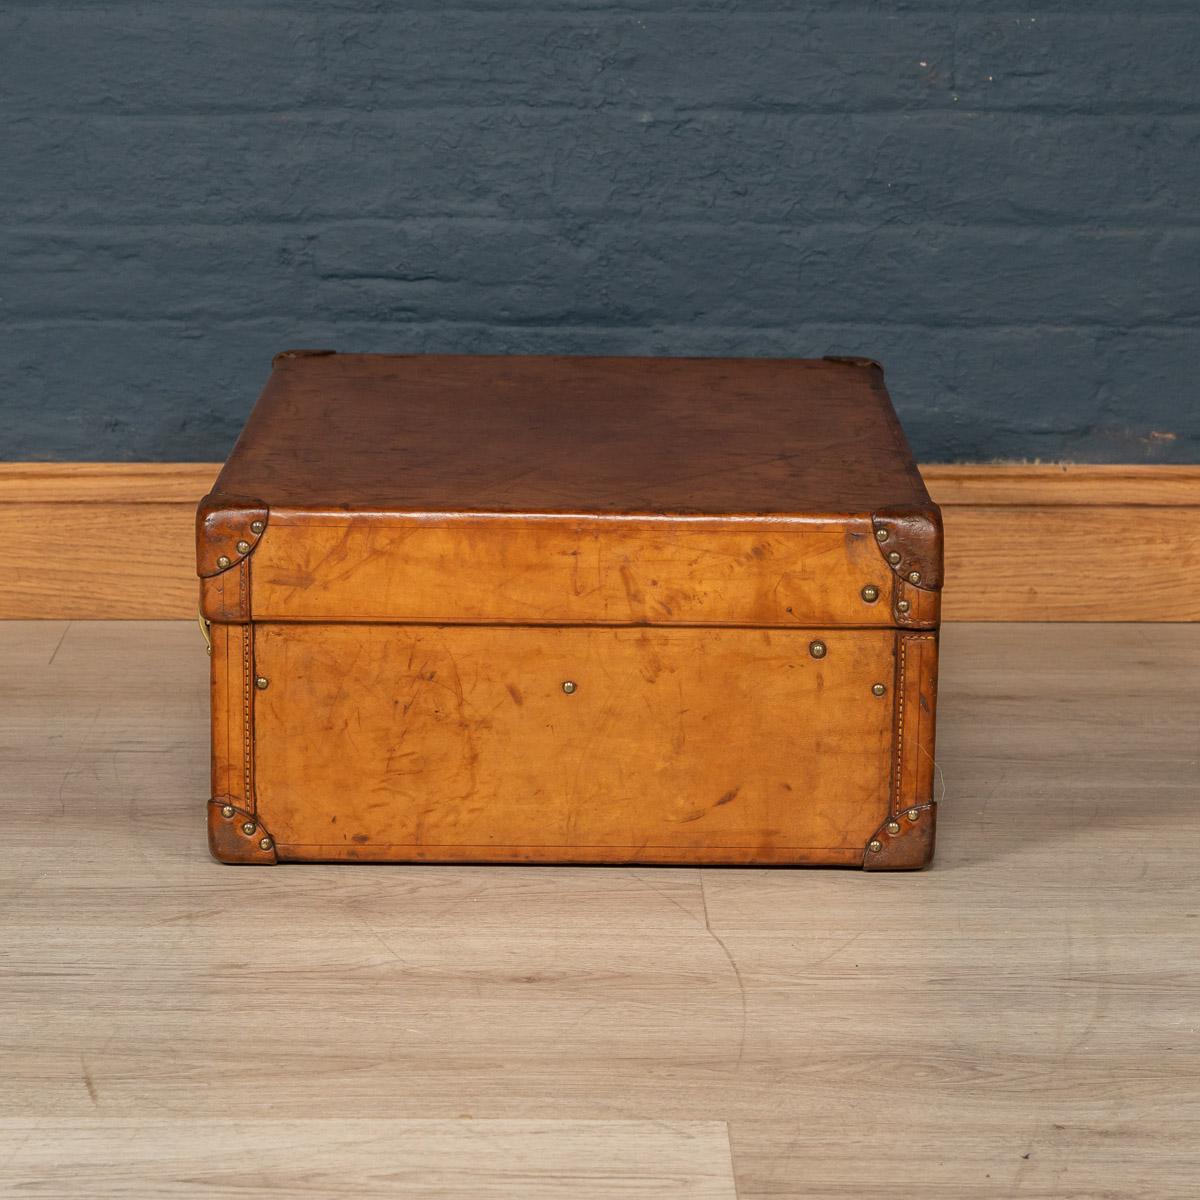 Antique early 20th century very rare Louis Vuitton suitcase, covered not in the world famous (but more common) monogram canvas but in a single piece of cow hide. These all-leather trunks and cases were made by special order and Louis Vuitton used to